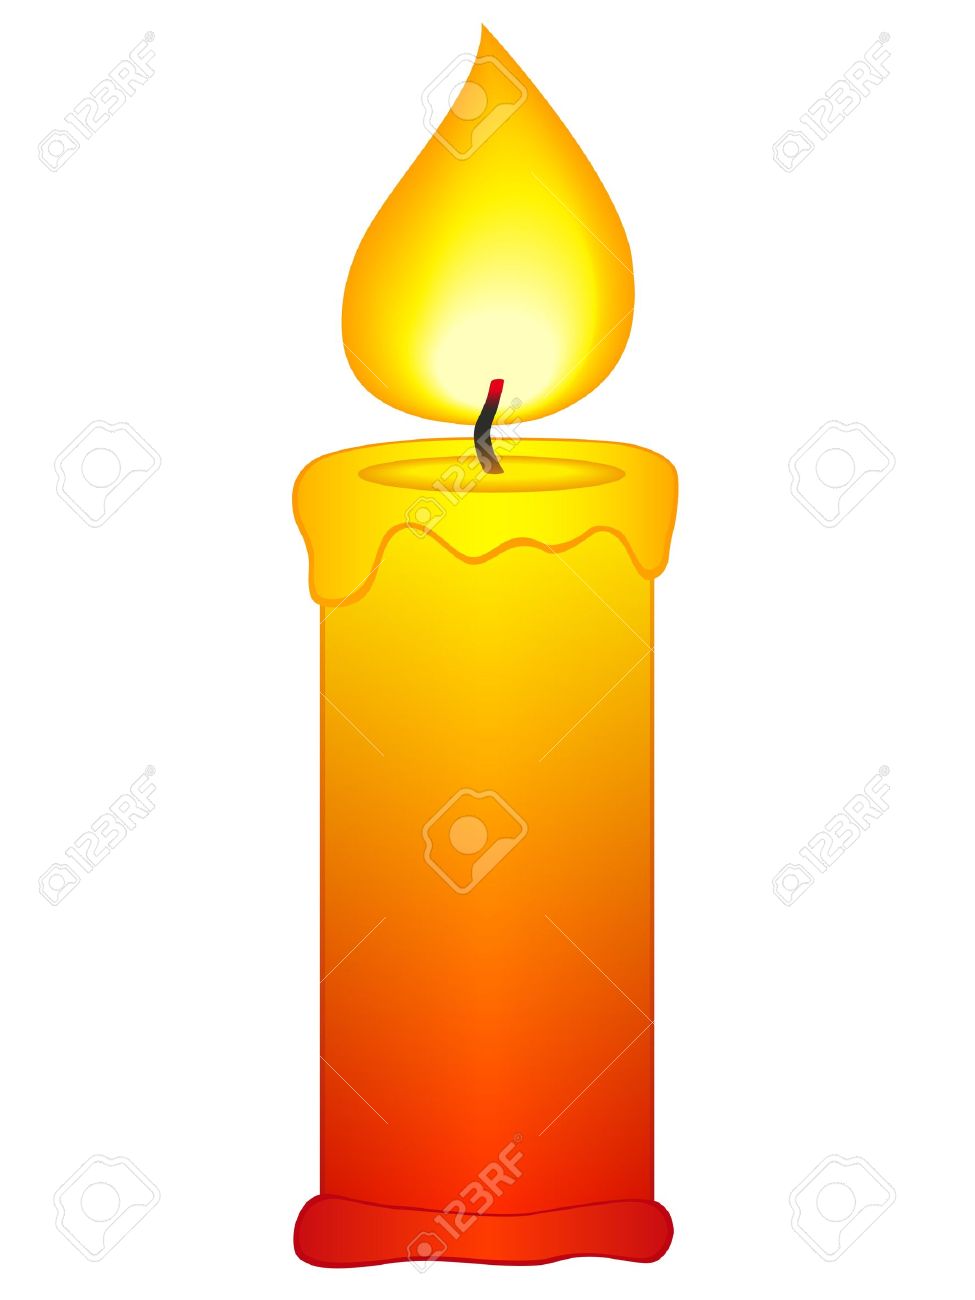 Candle clip art images free c